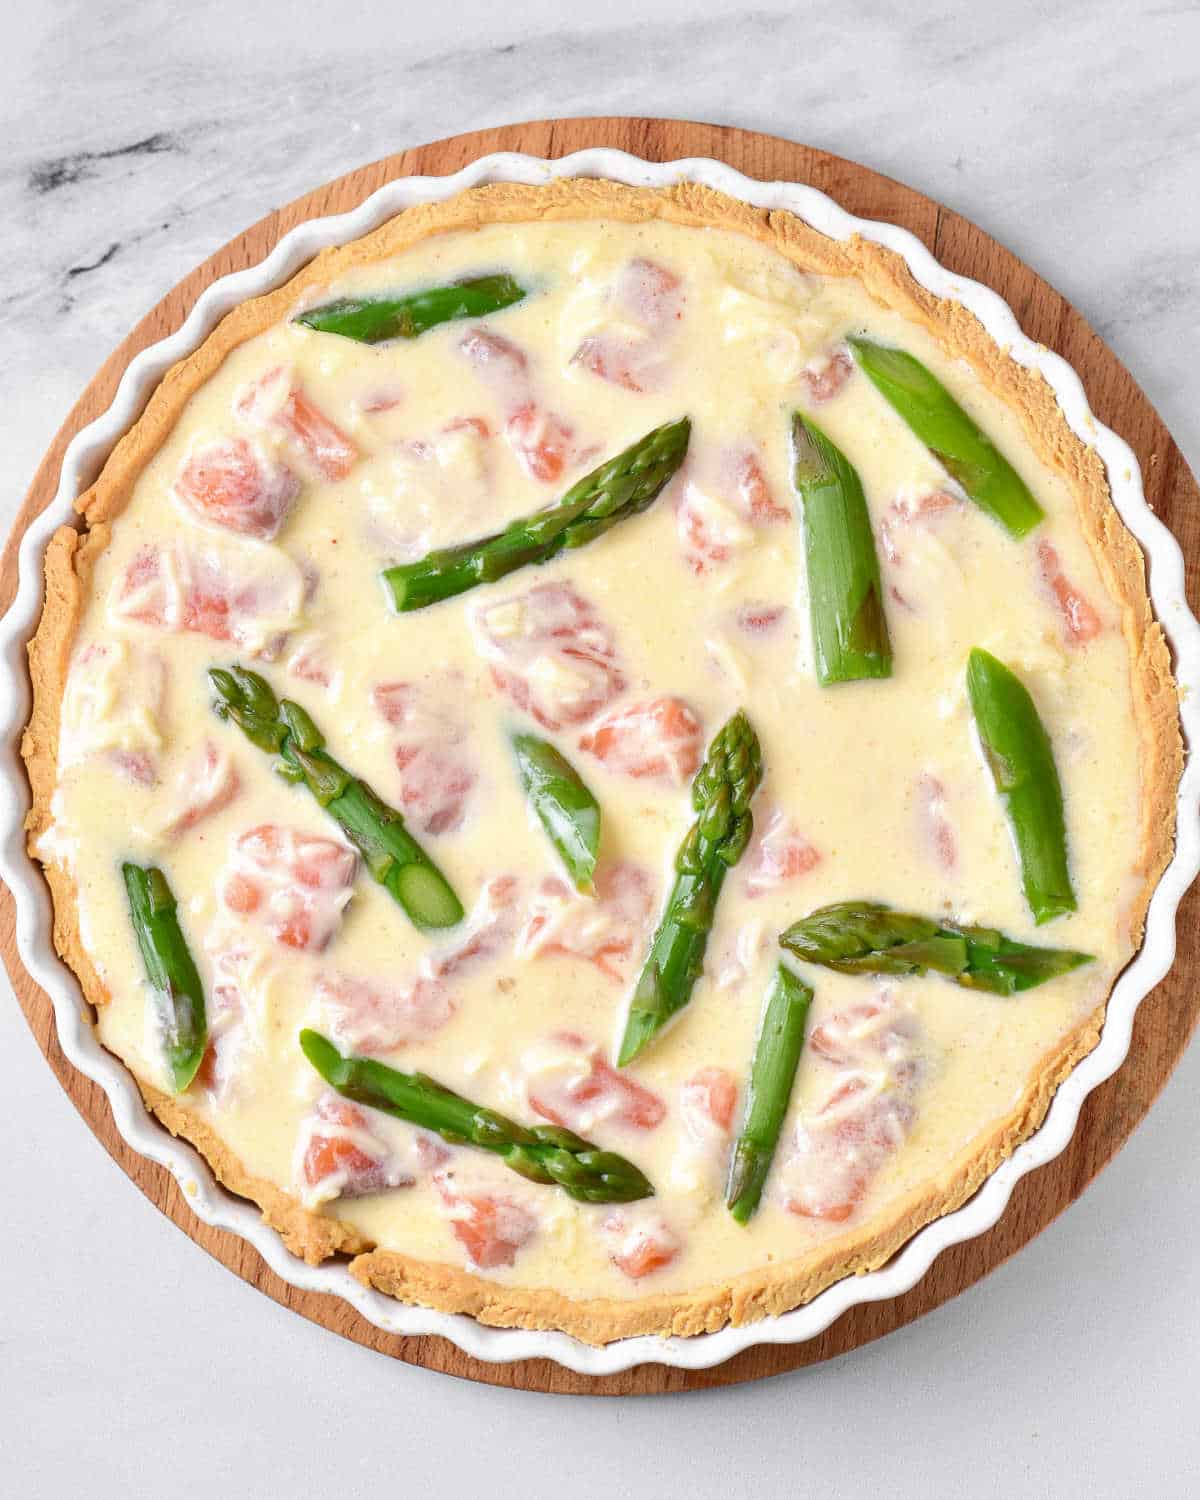 Asparagus pieces top a salmon quiche filling in a round pie dish. White marbled surface. 